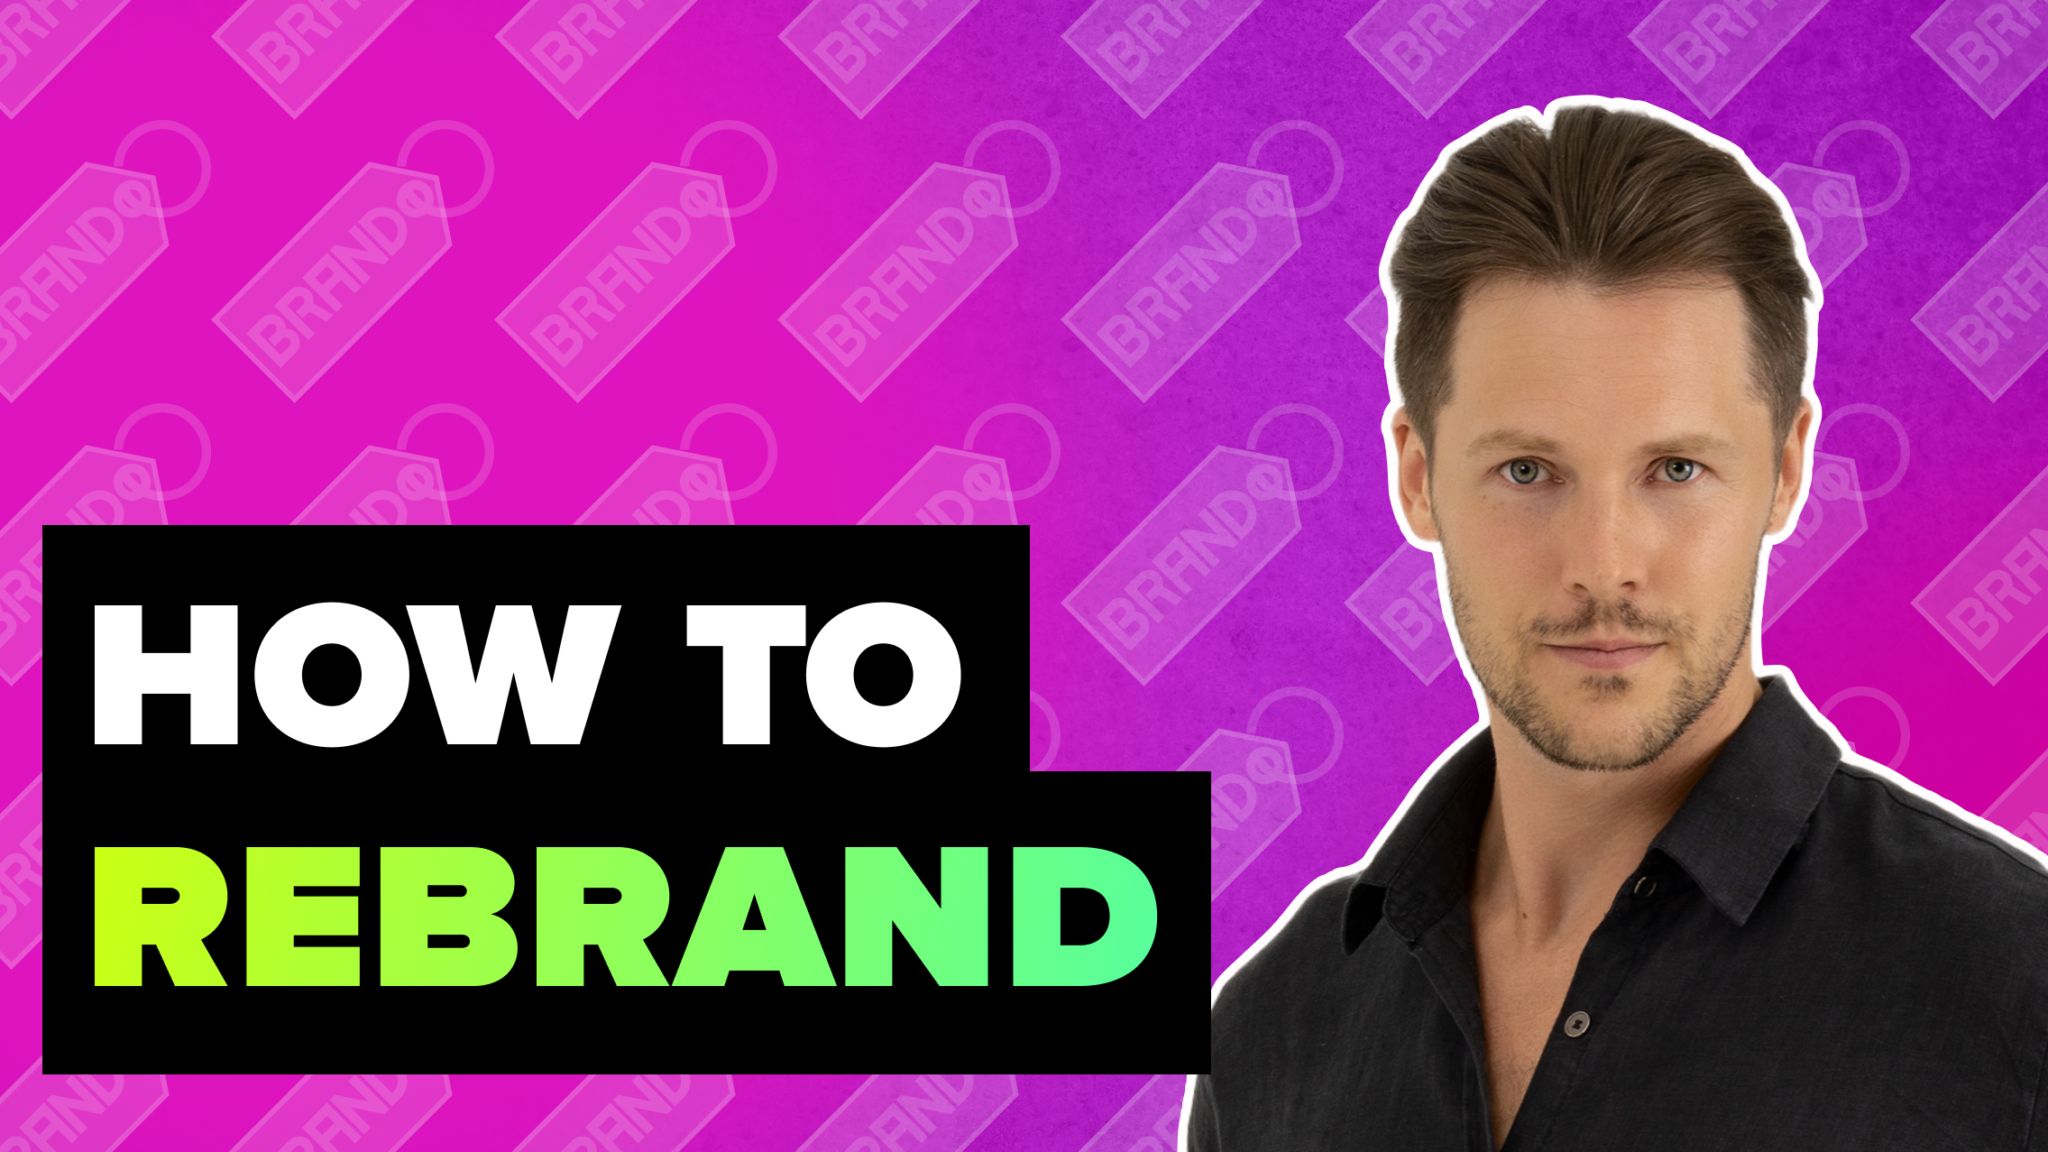 How to rebrand